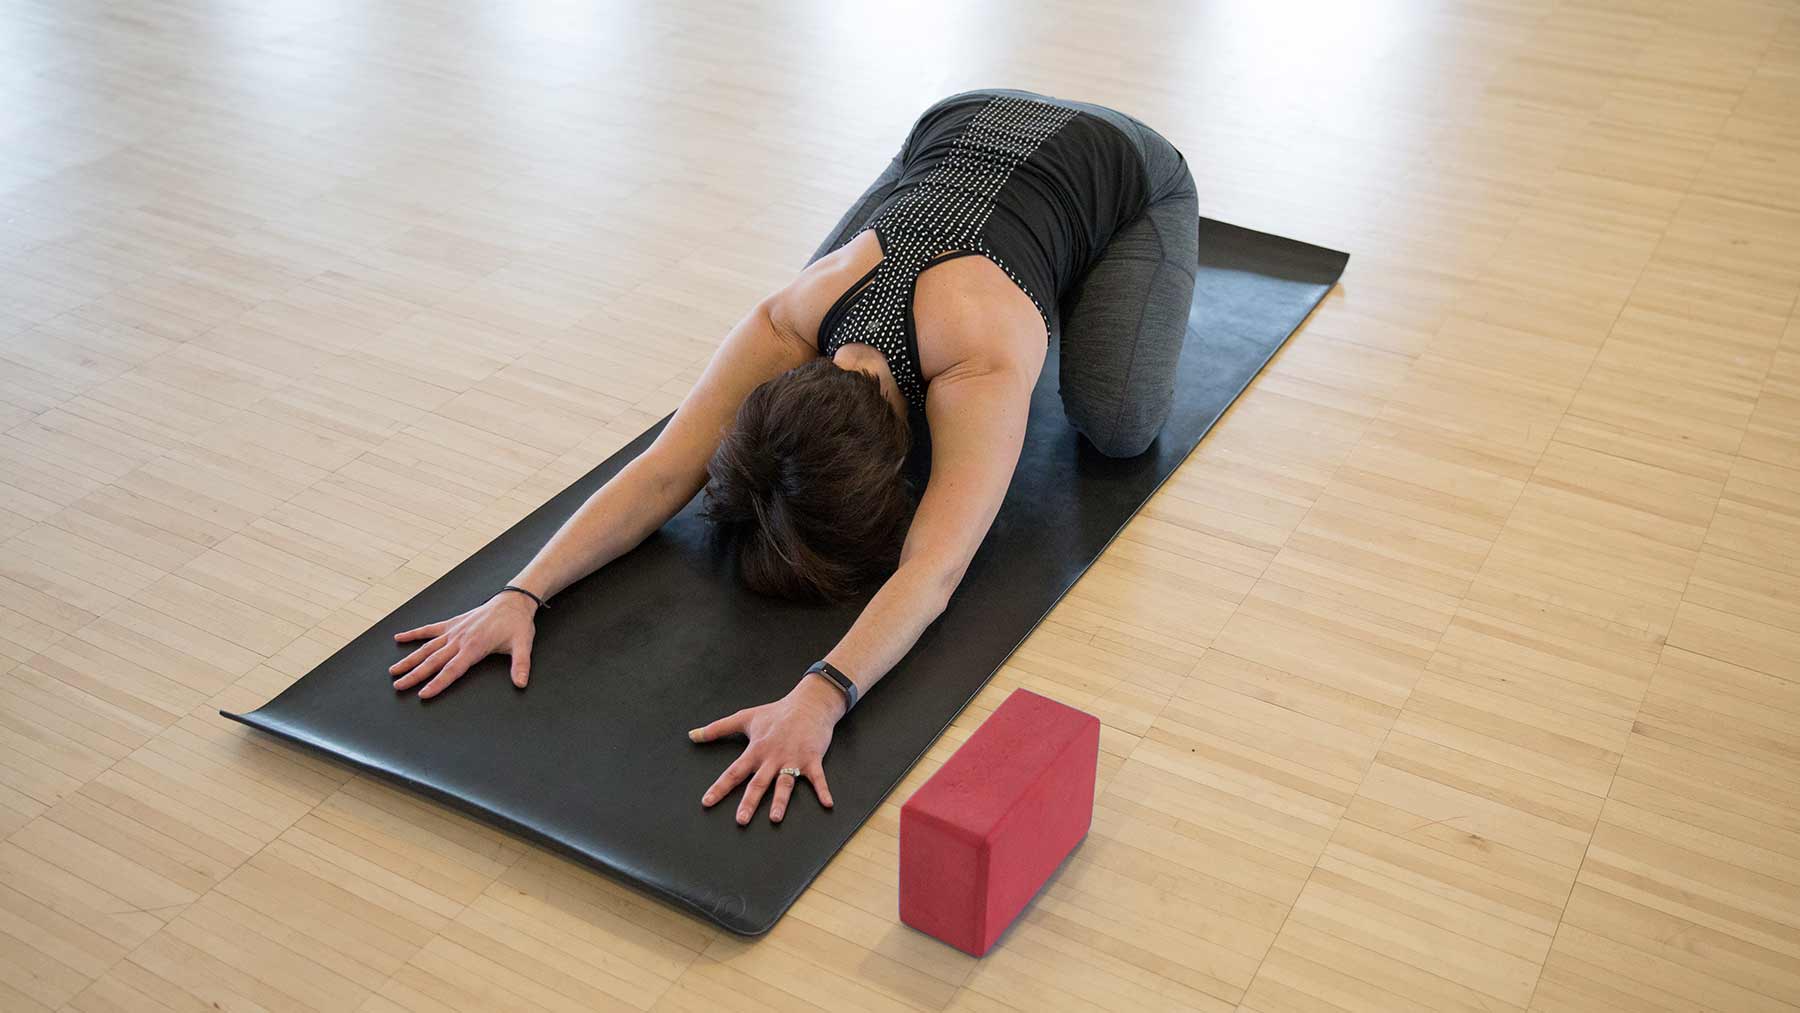 Woman doing yoga as example of how to relieve pain without using opioids